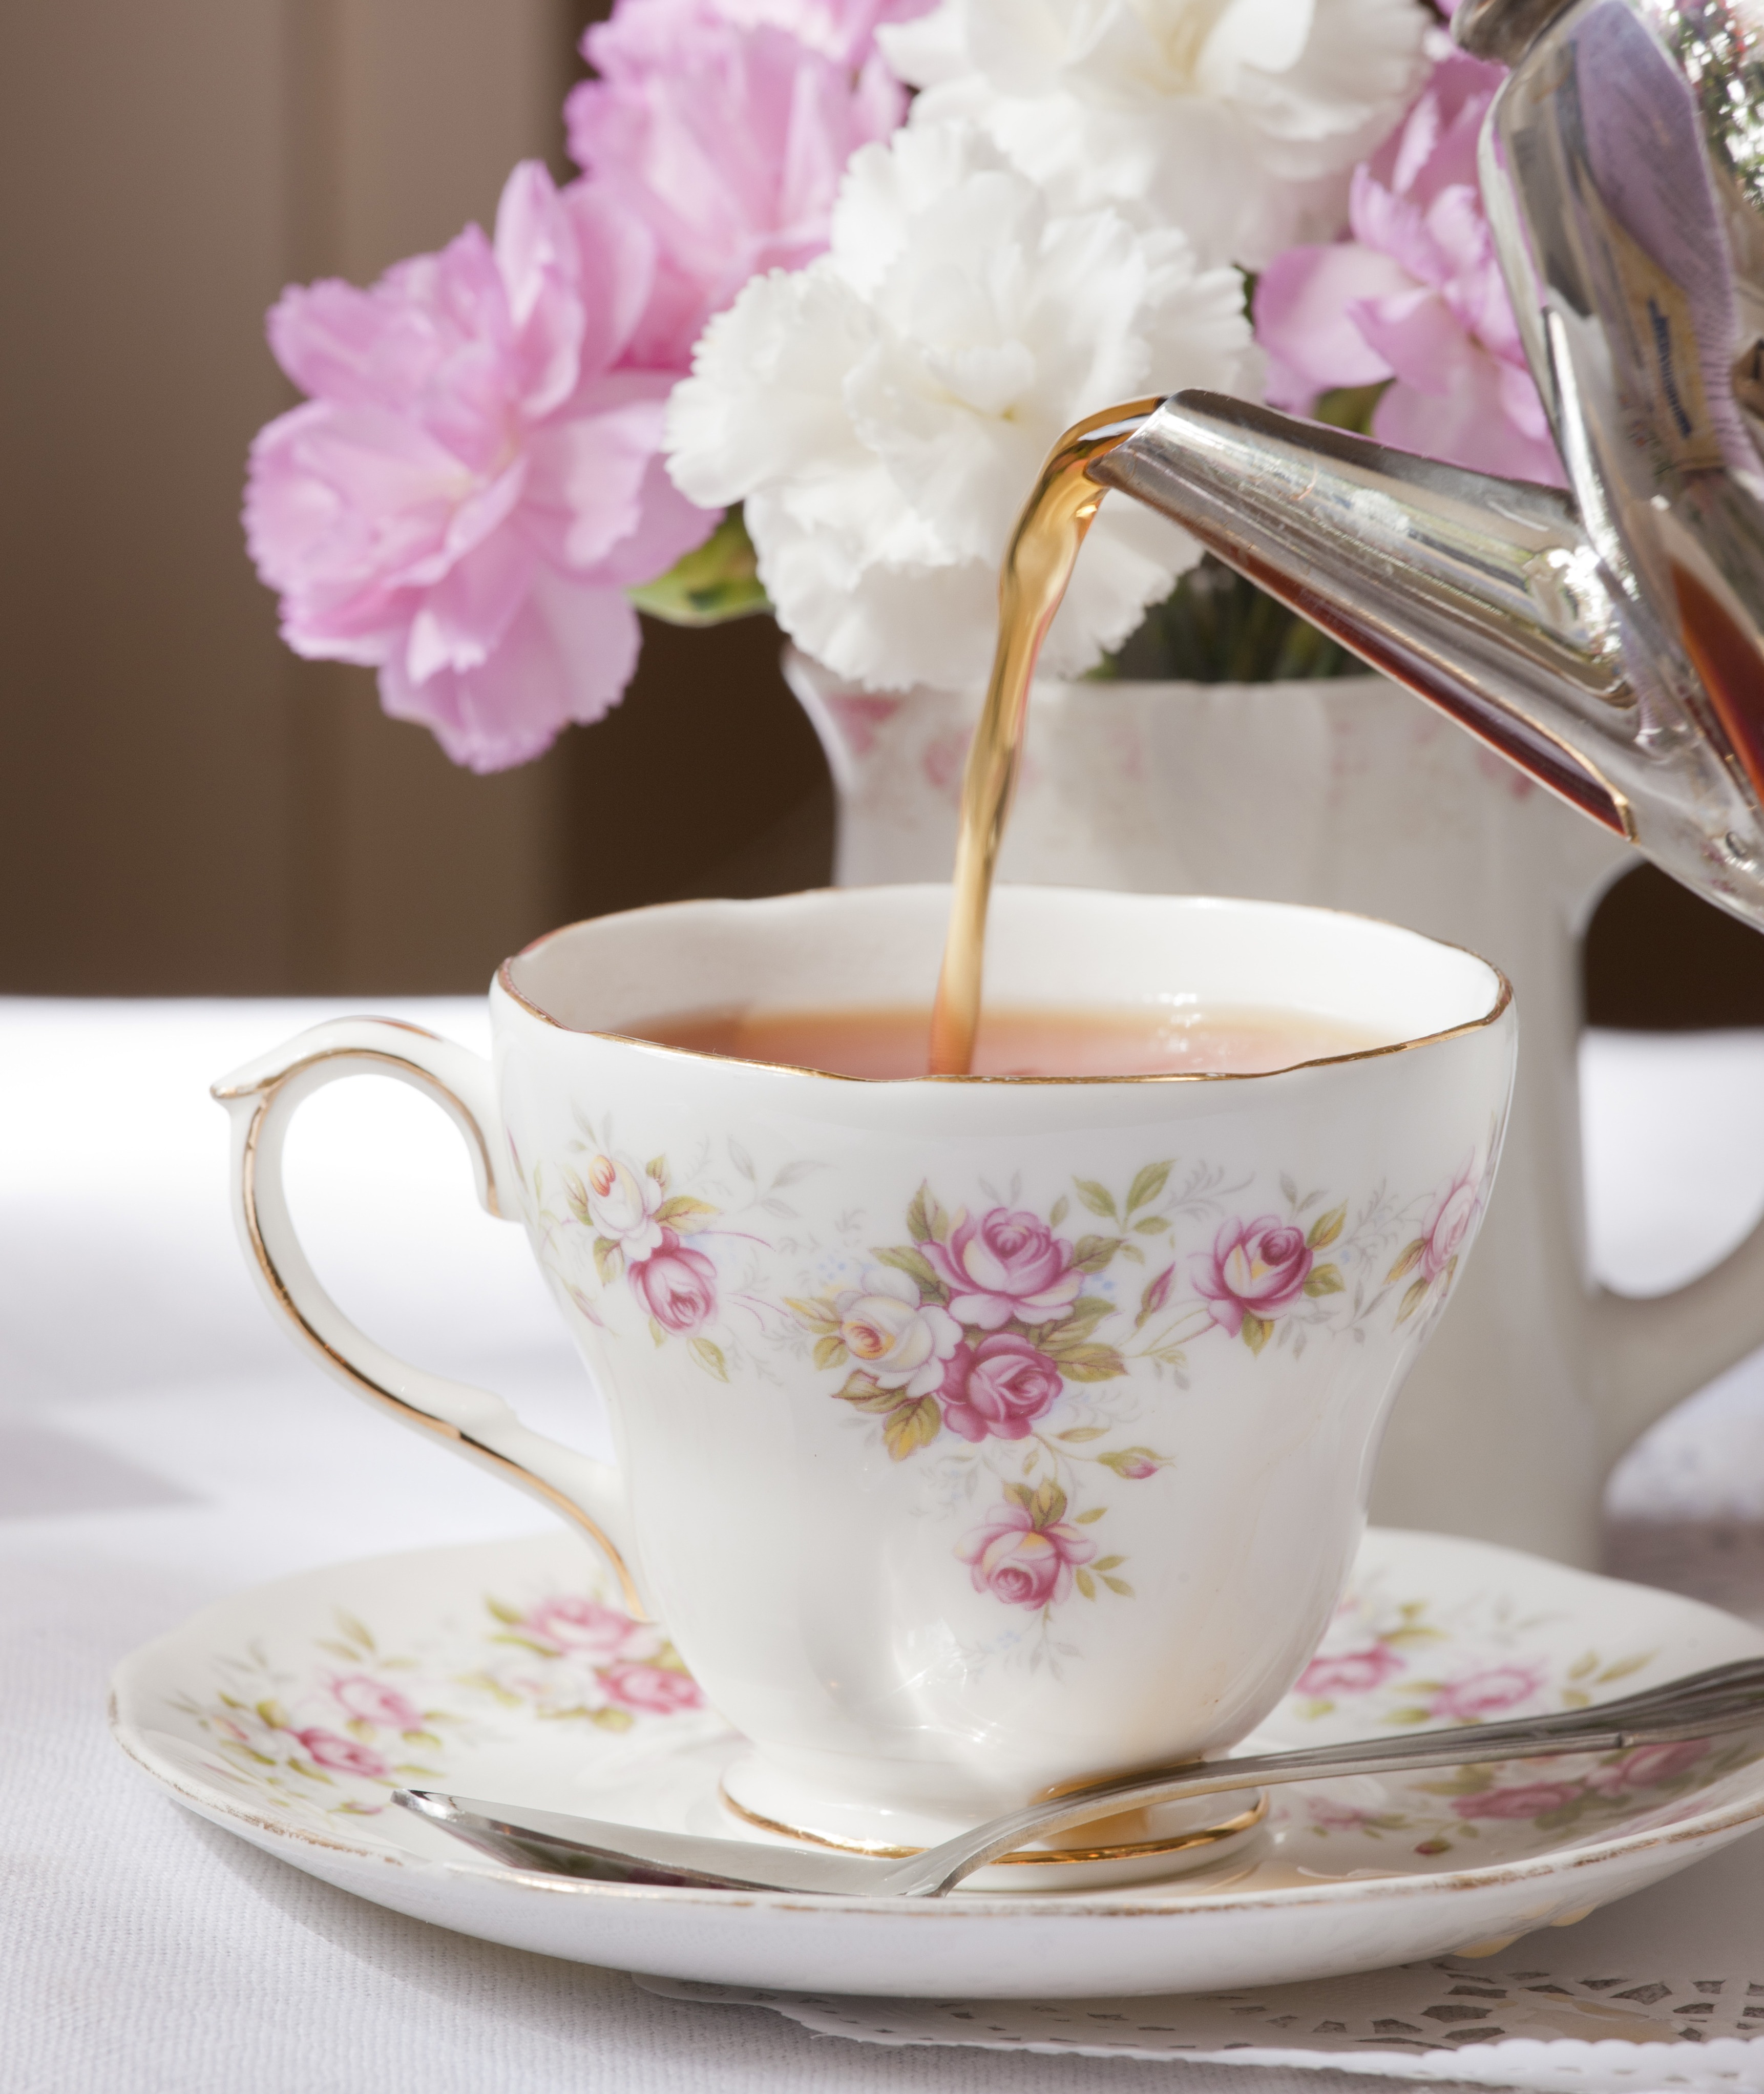 free images of tea cups